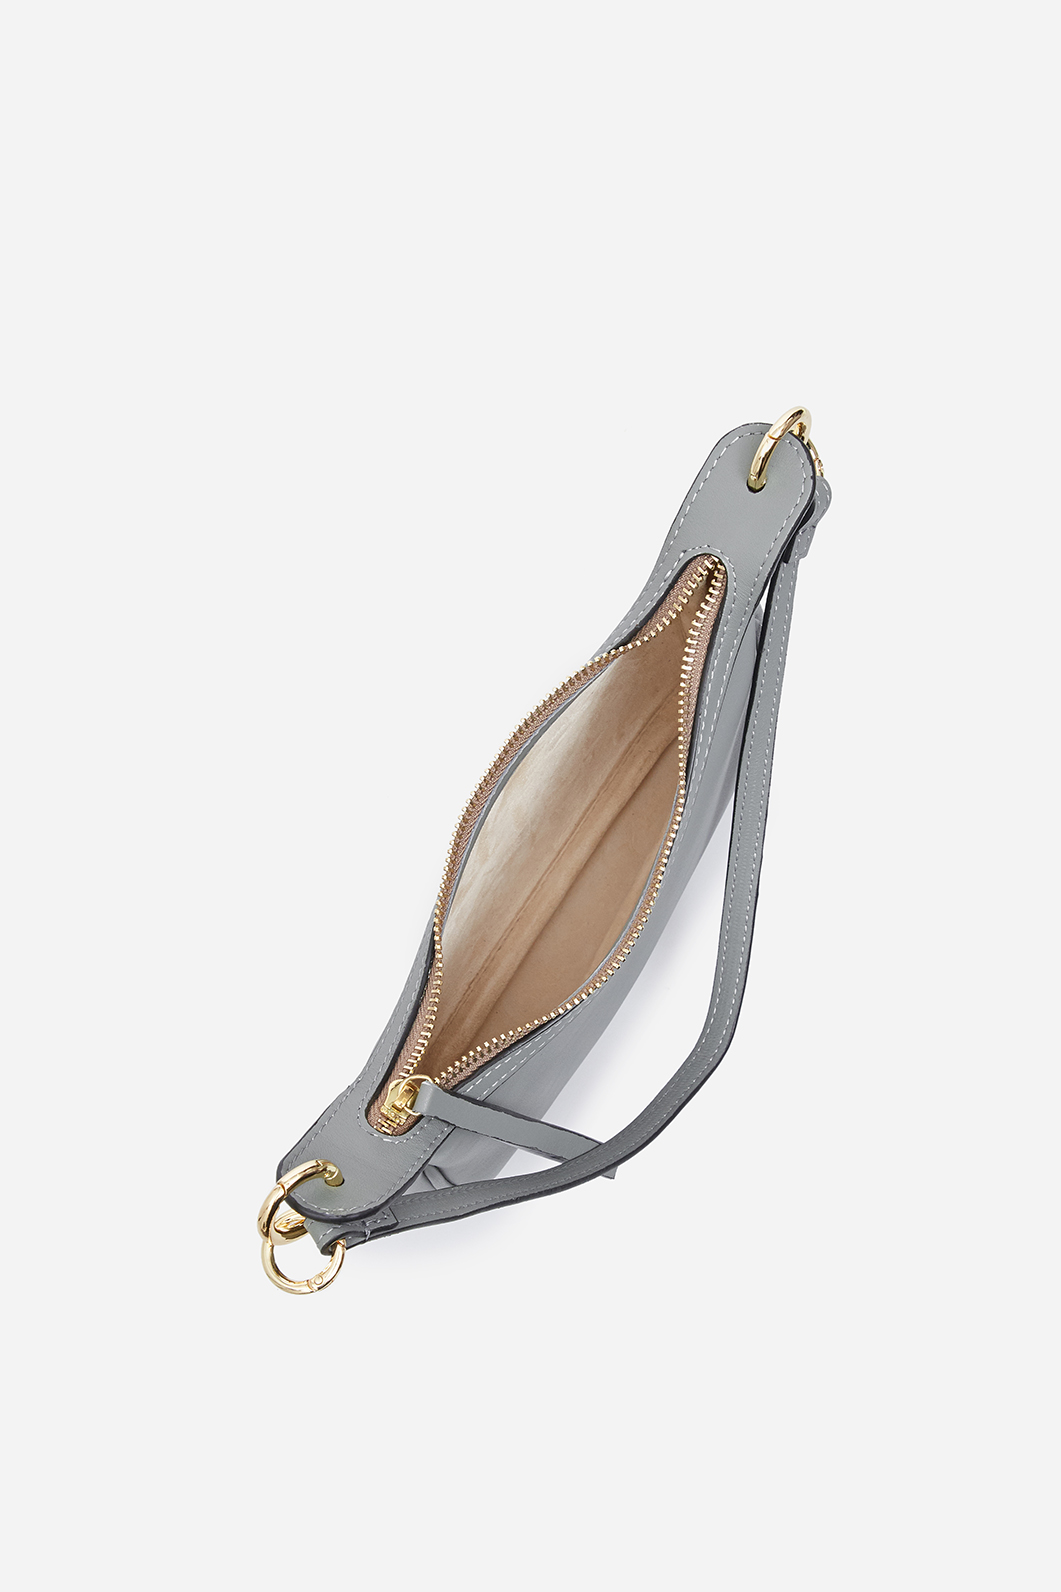 Gia grey leather
baguette bag /gold/